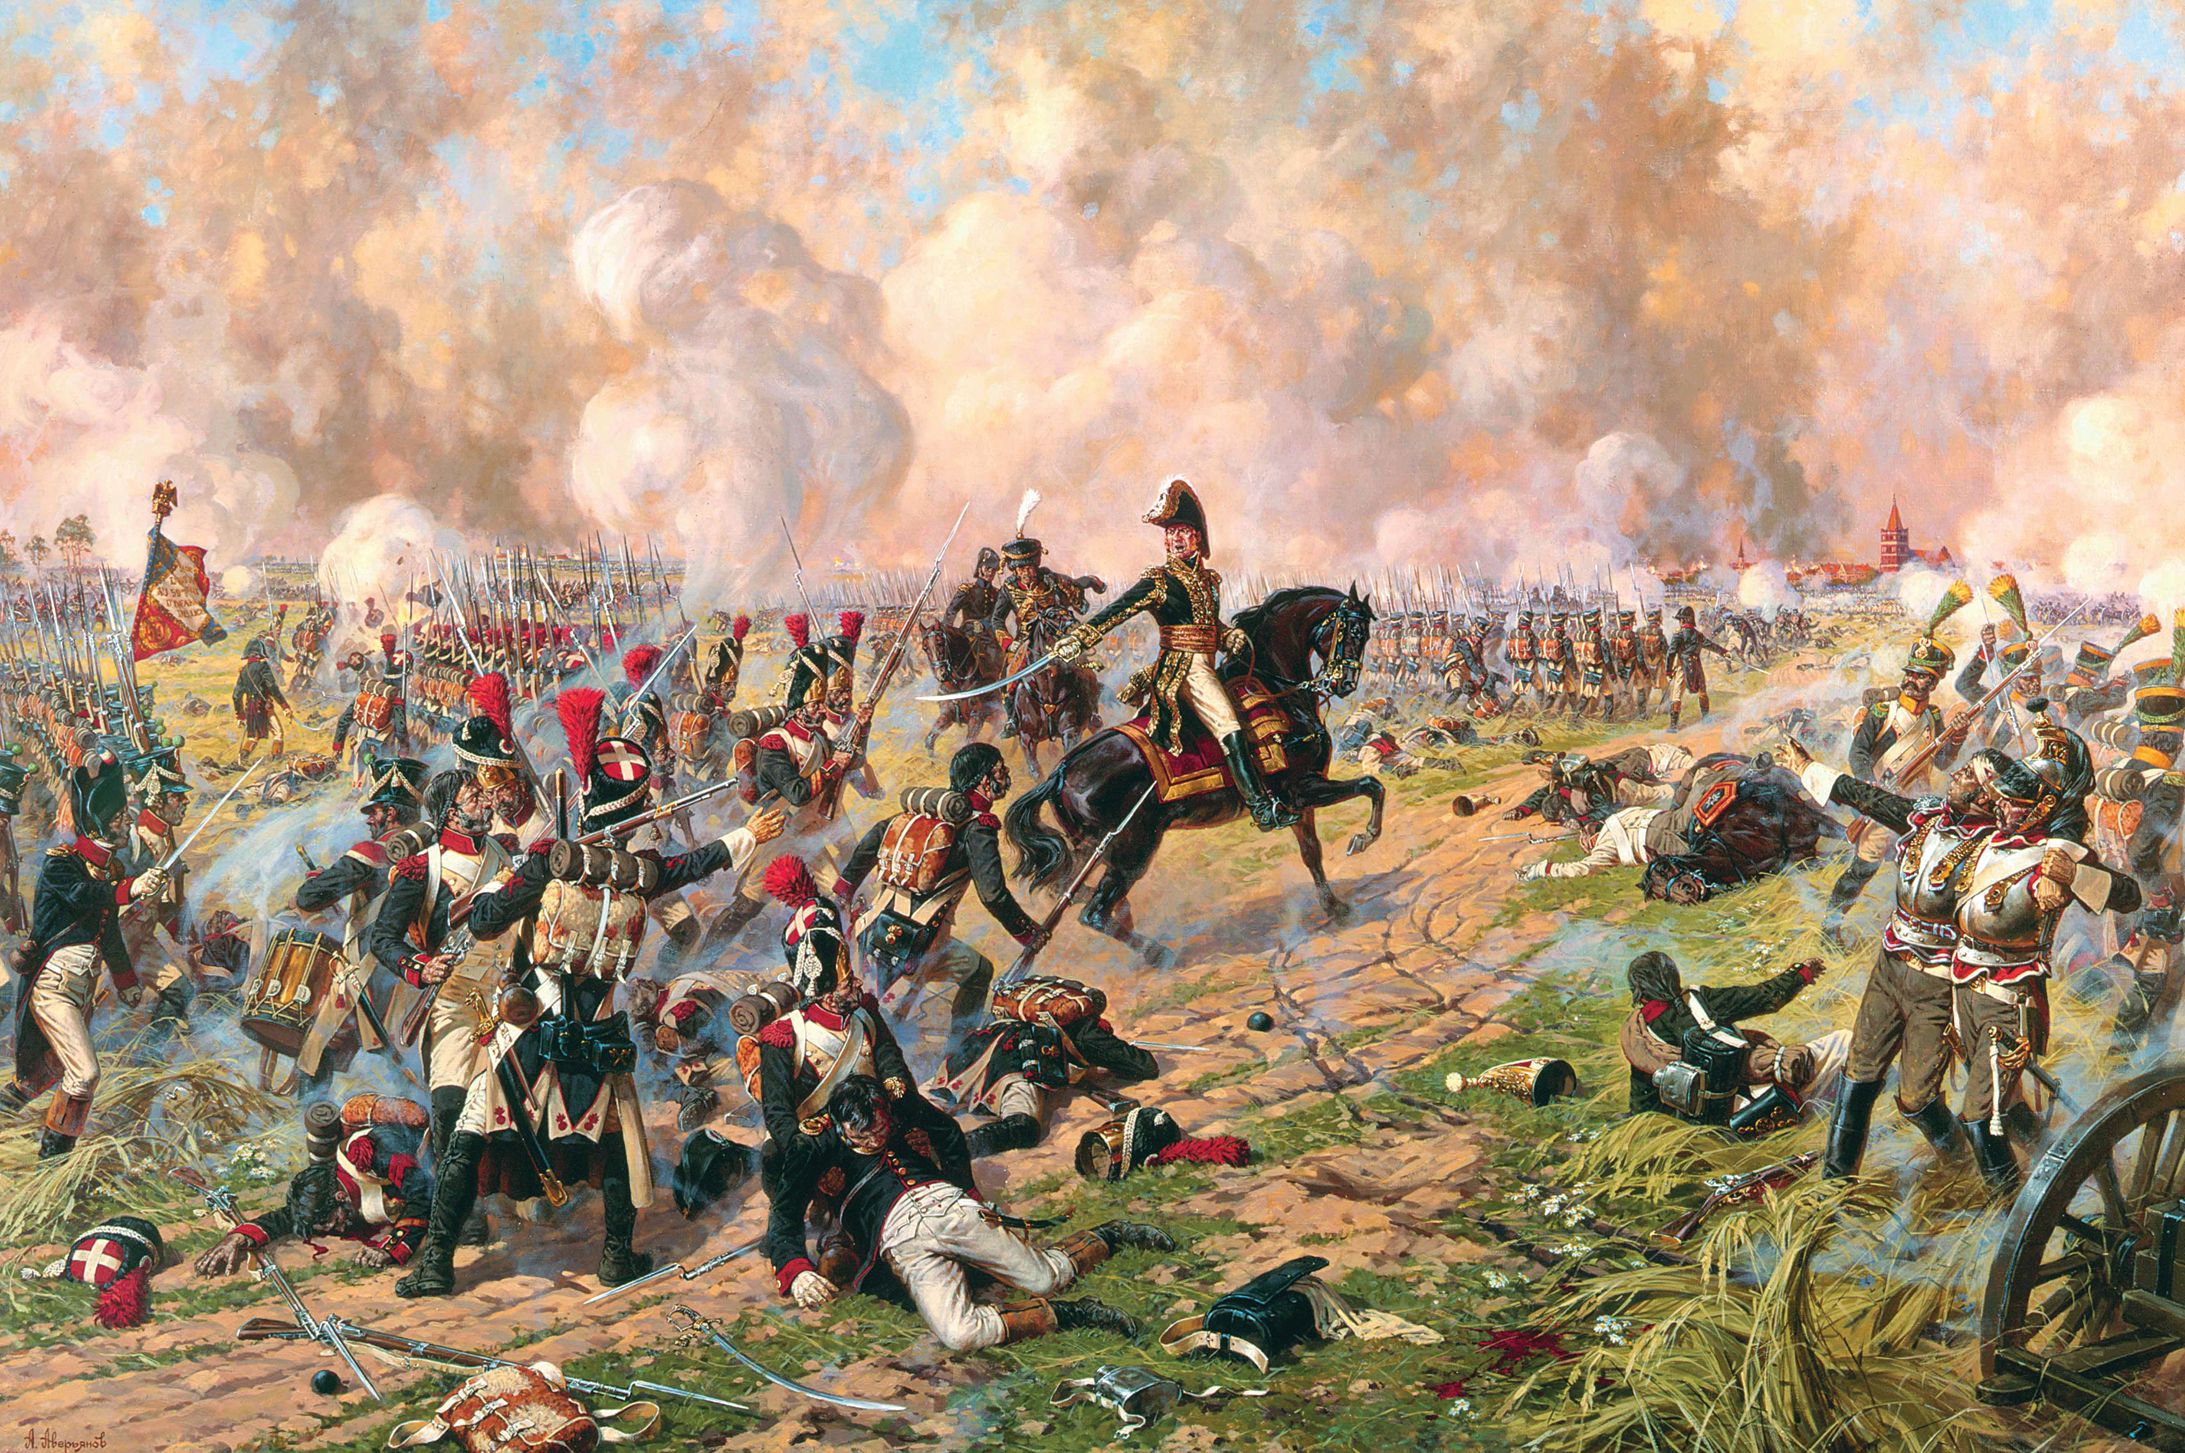 Marshal Michel Ney rallies his troops to continue their steady advance against the Russian left. By 8:30 pm. Ney’s troops had entered Friedland.